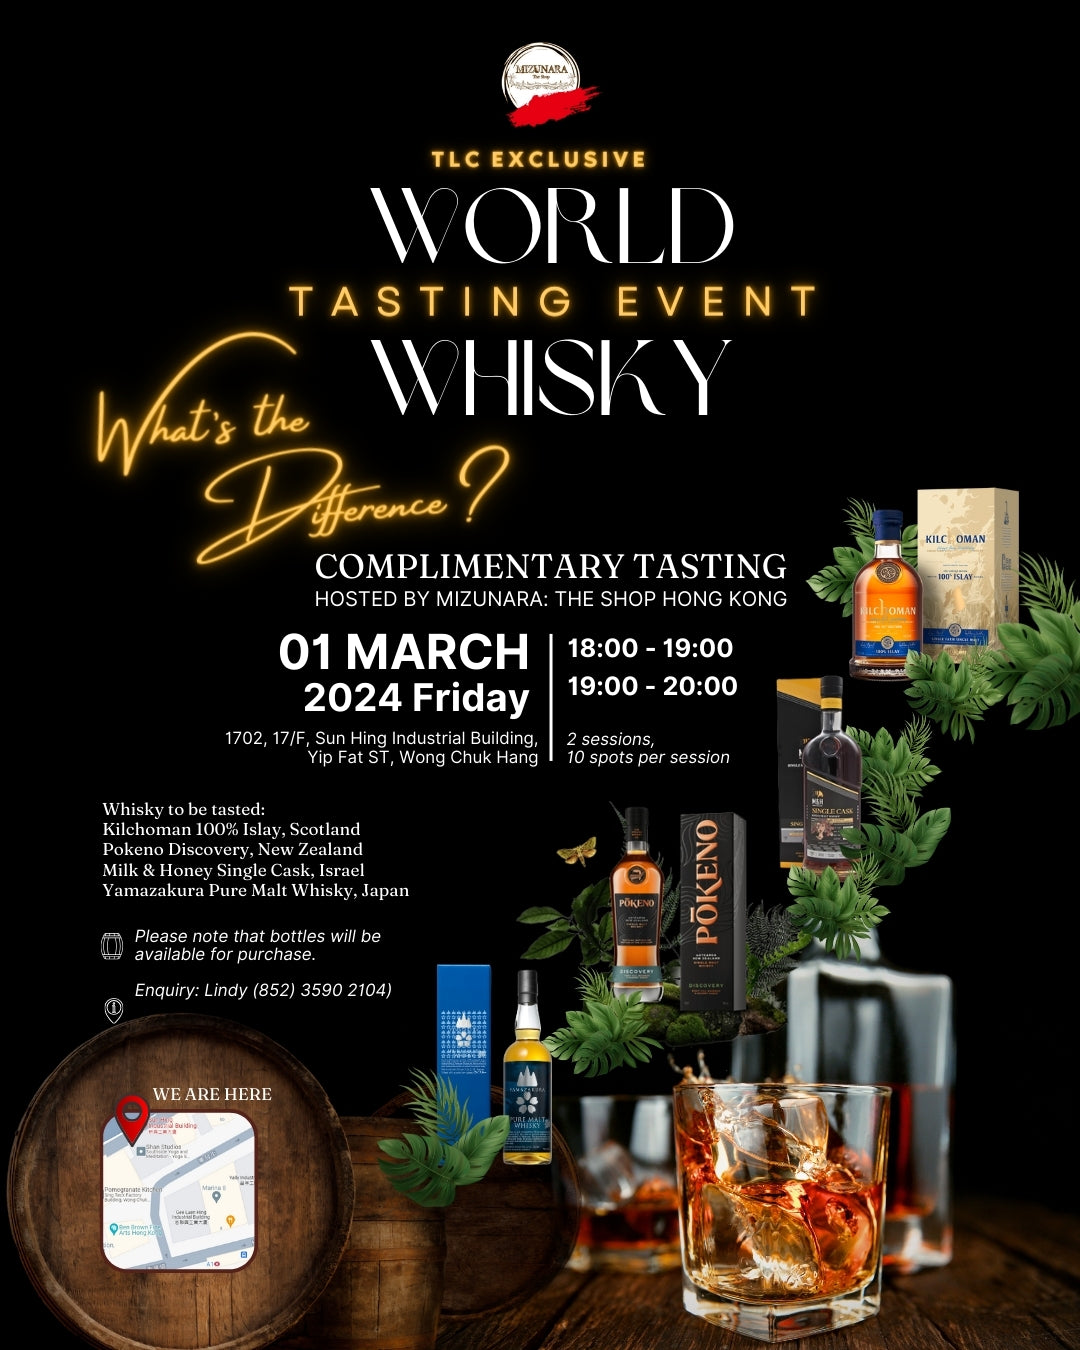 TLC Exclusive World Whisky Tasting Event - March, 2024